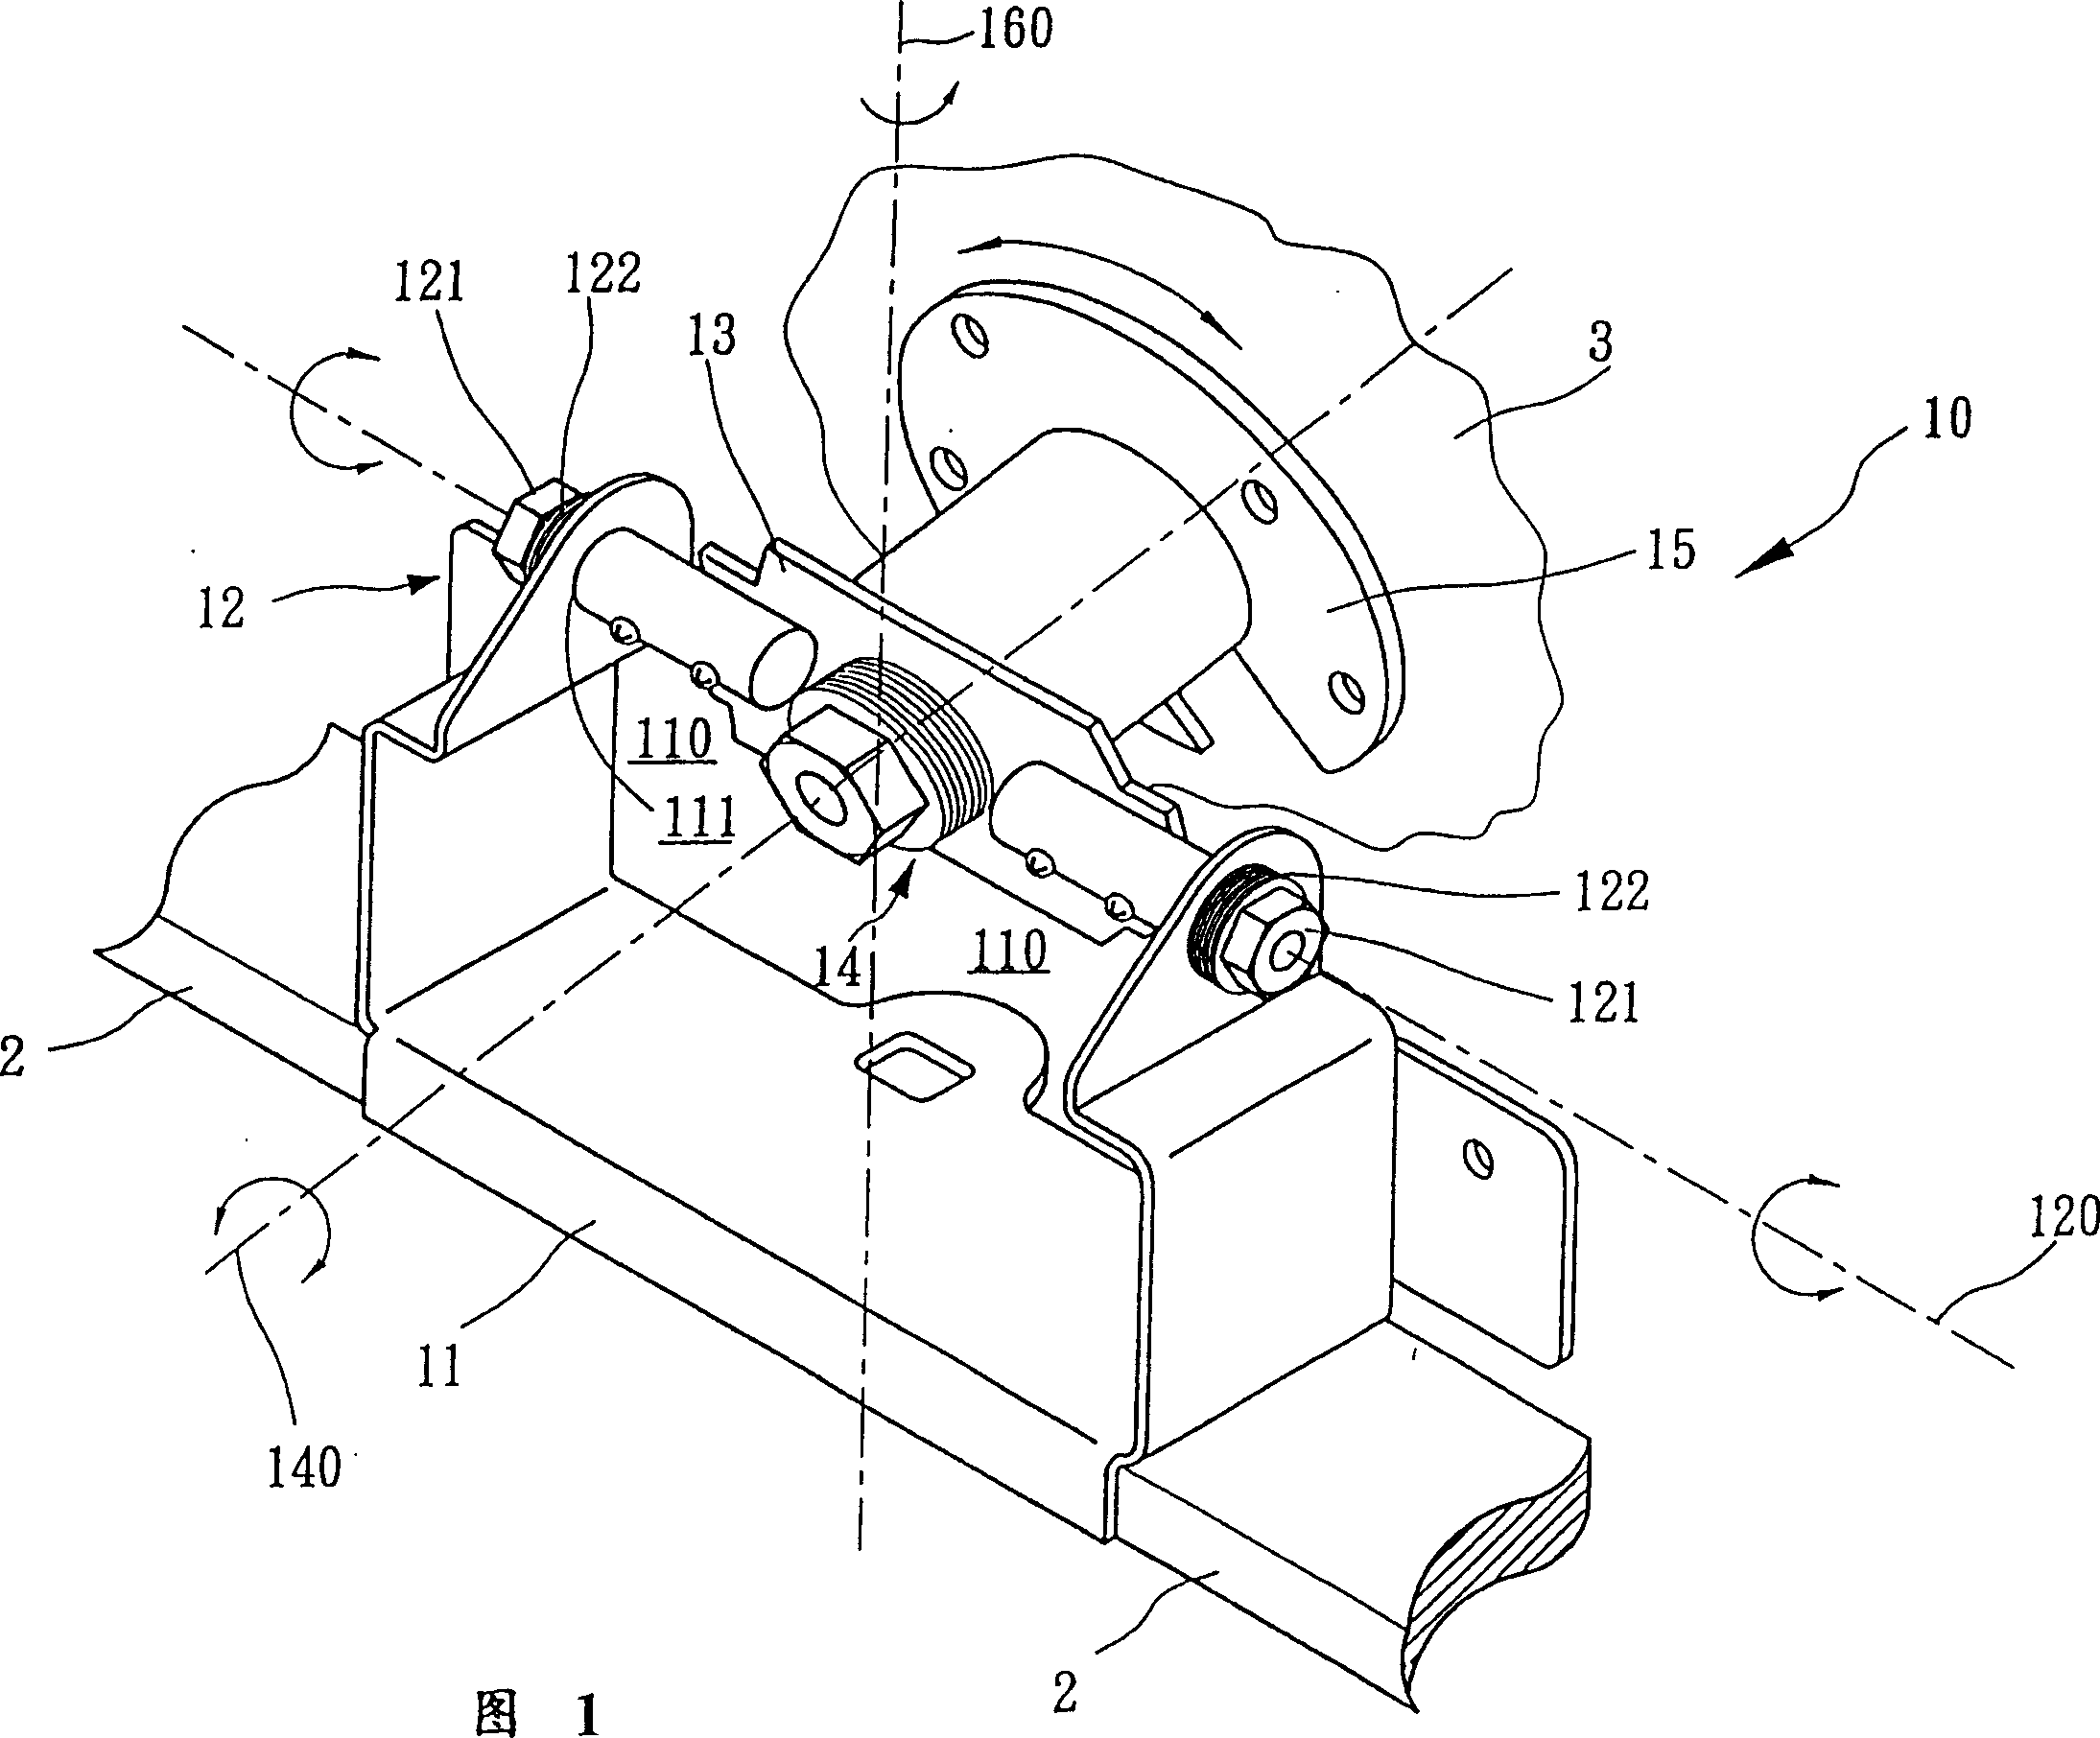 Three-axis pivot structure